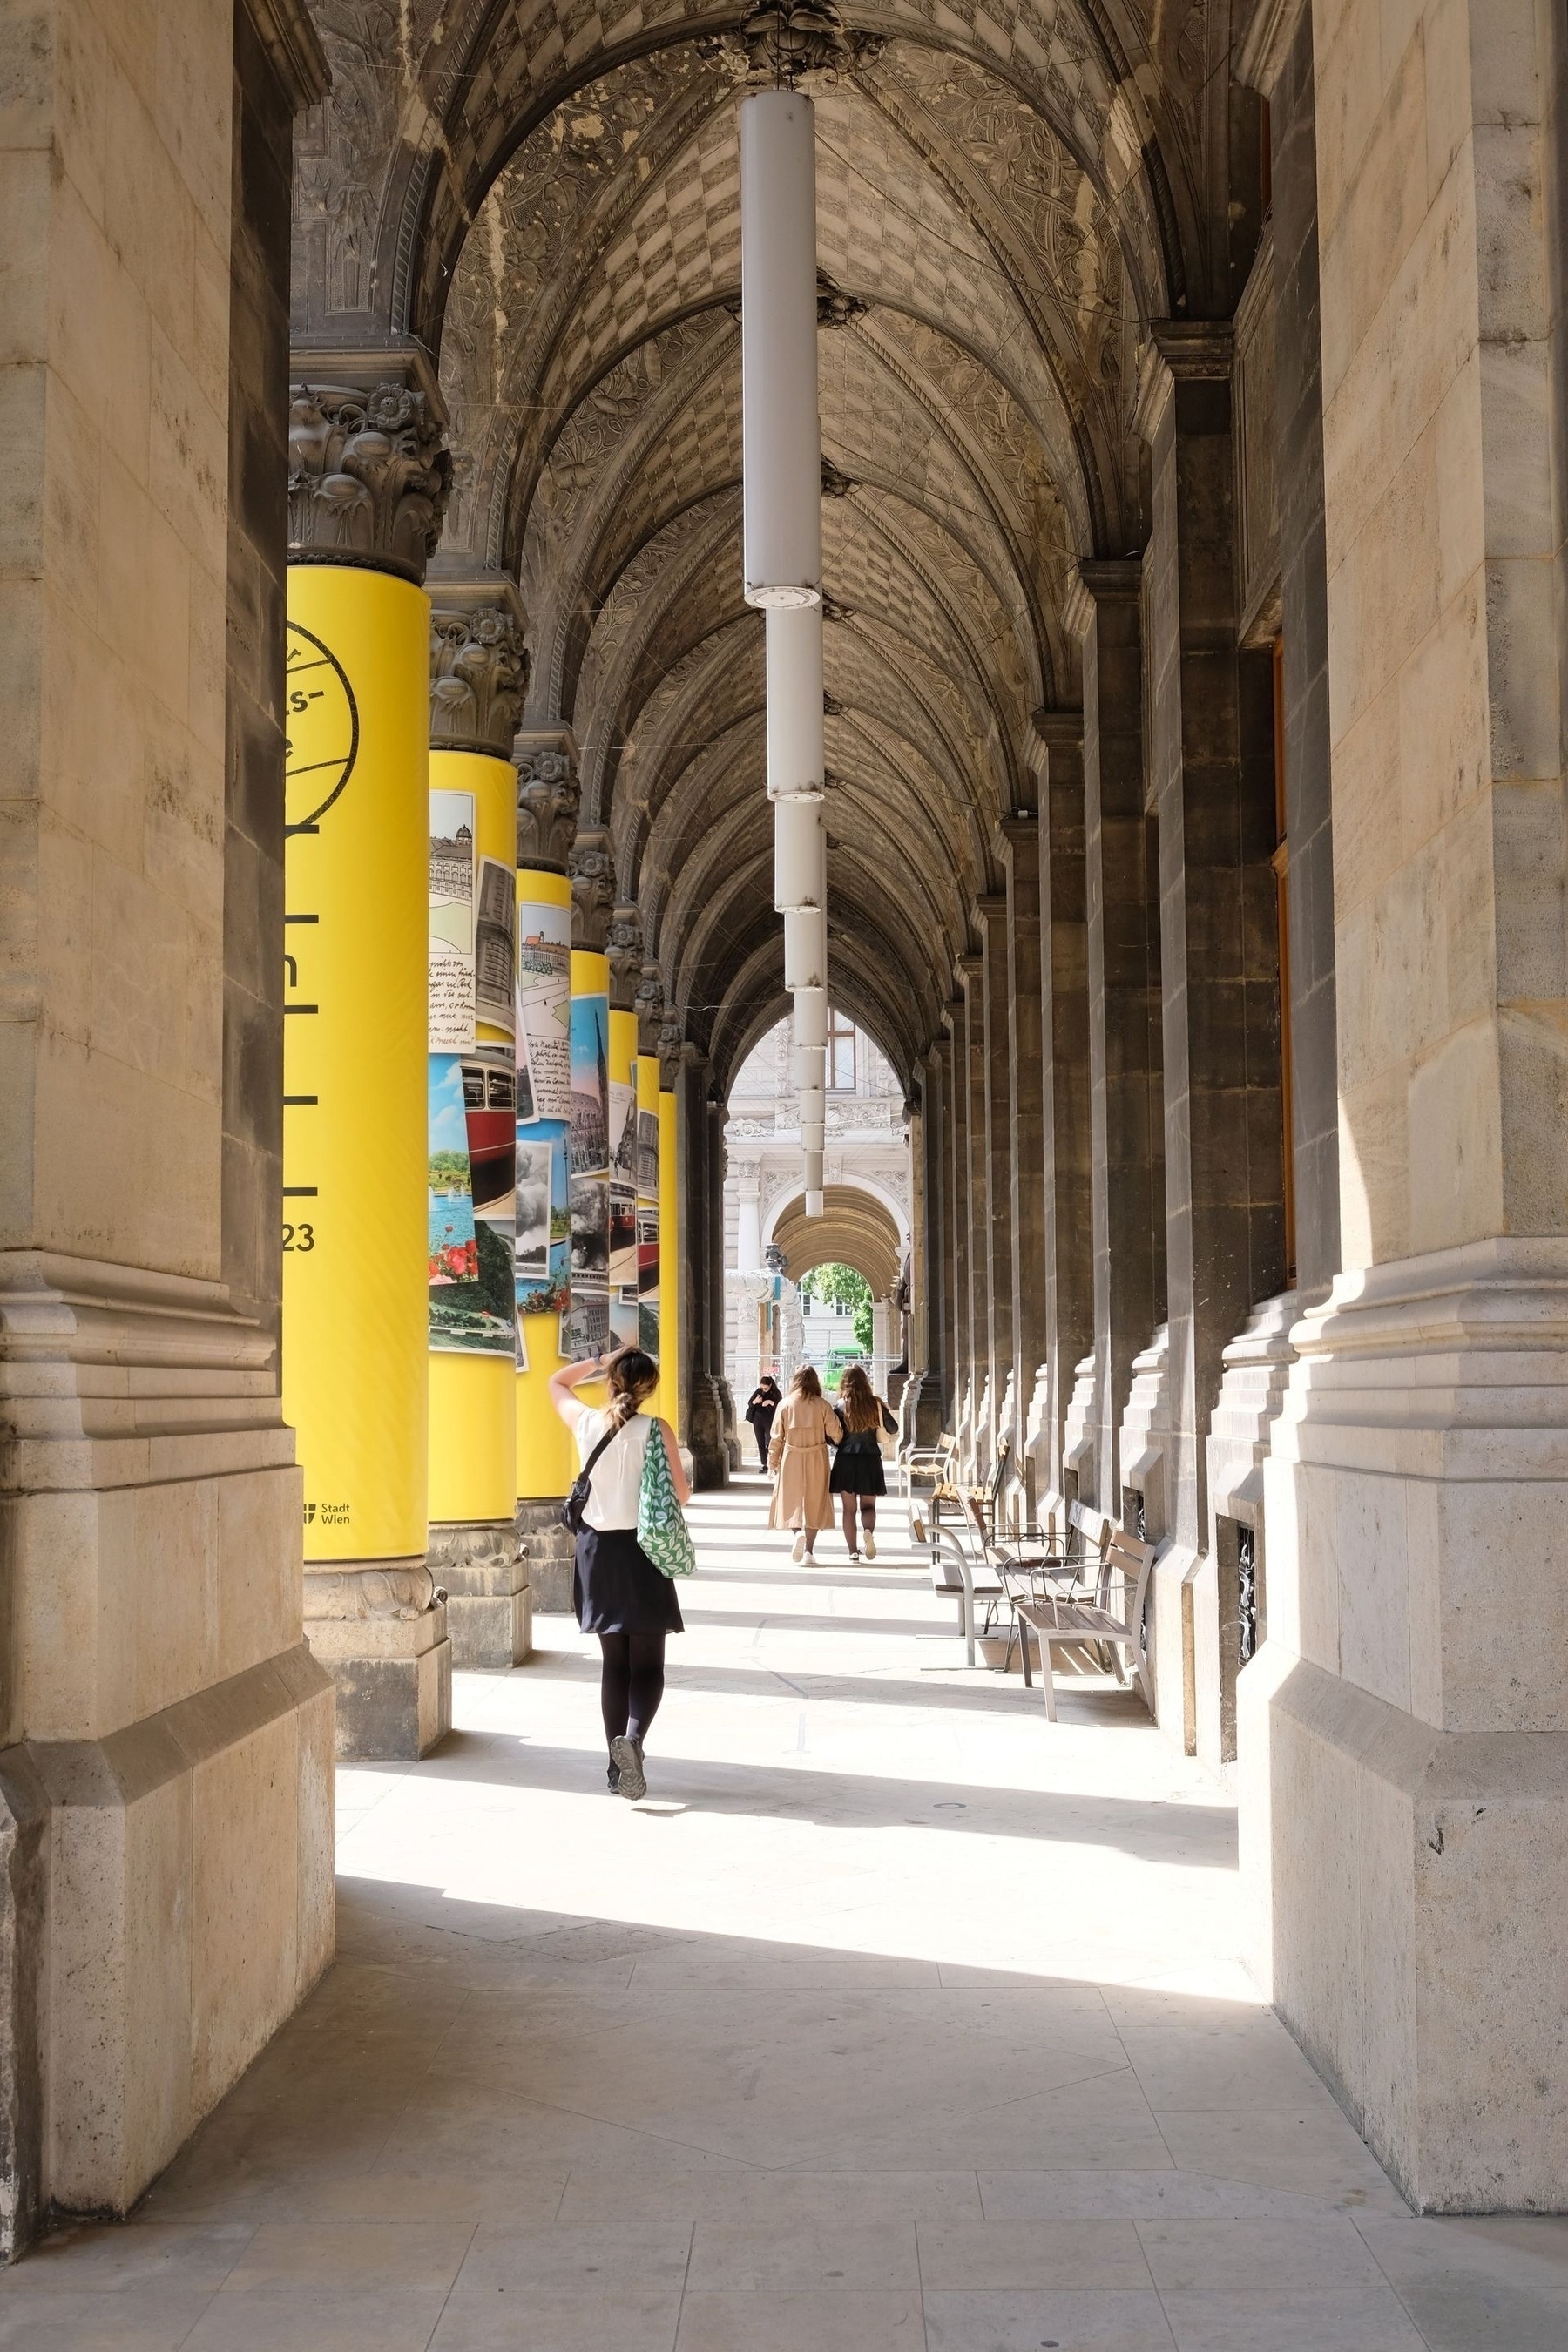 Stone arcade, on the left are columns covered in yellow posters, the building is rather old, a couple of people are walking through the arcade with their back to the camera; the sun is shinning